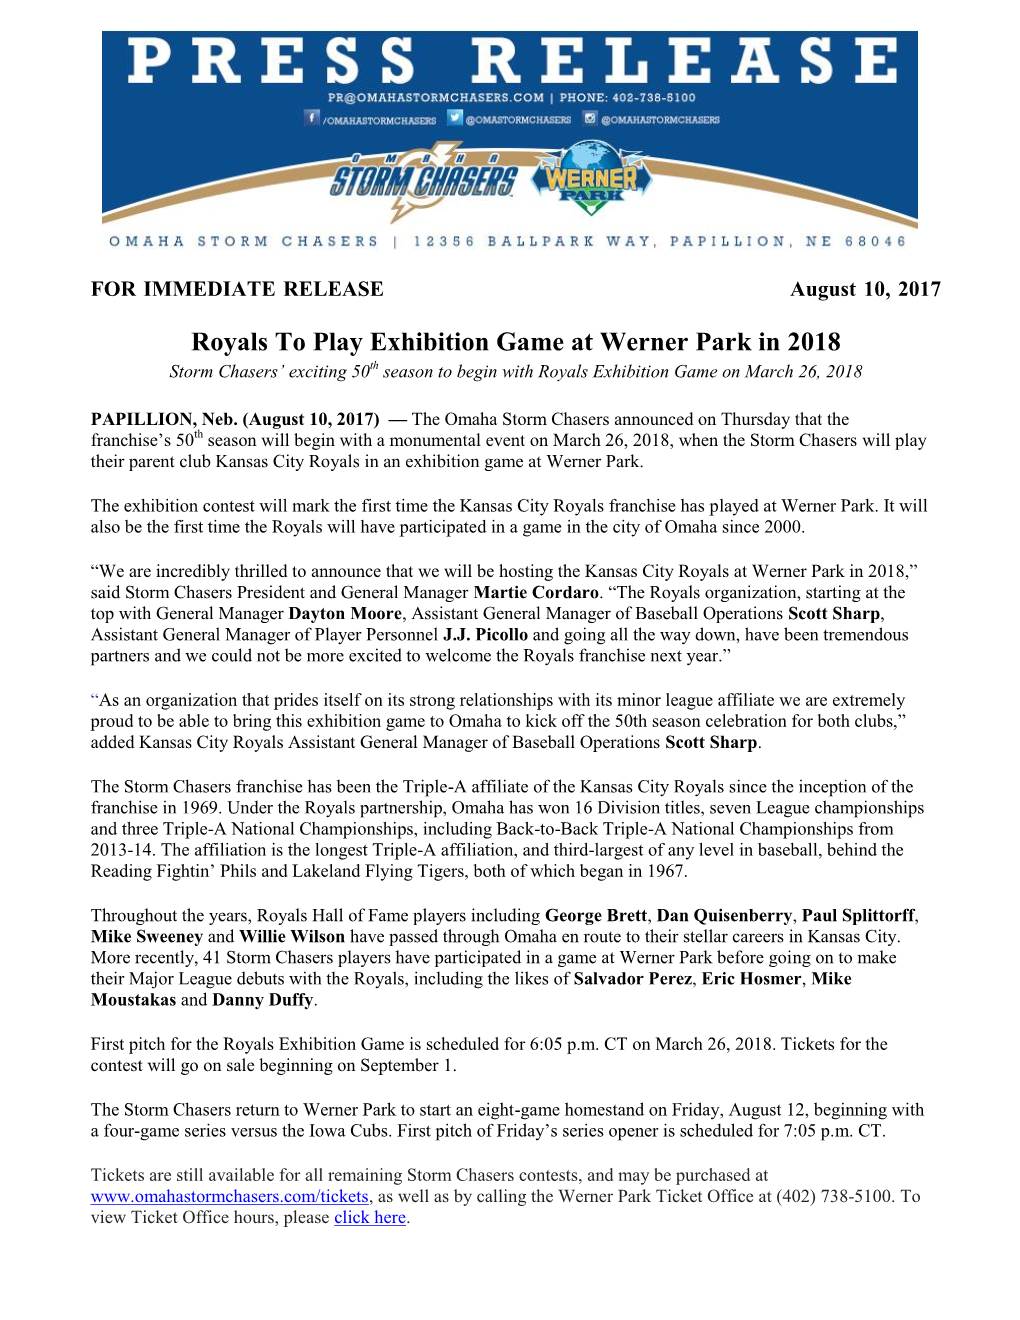 Royals to Play Exhibition Game at Werner Park in 2018 Storm Chasers’ Exciting 50Th Season to Begin with Royals Exhibition Game on March 26, 2018